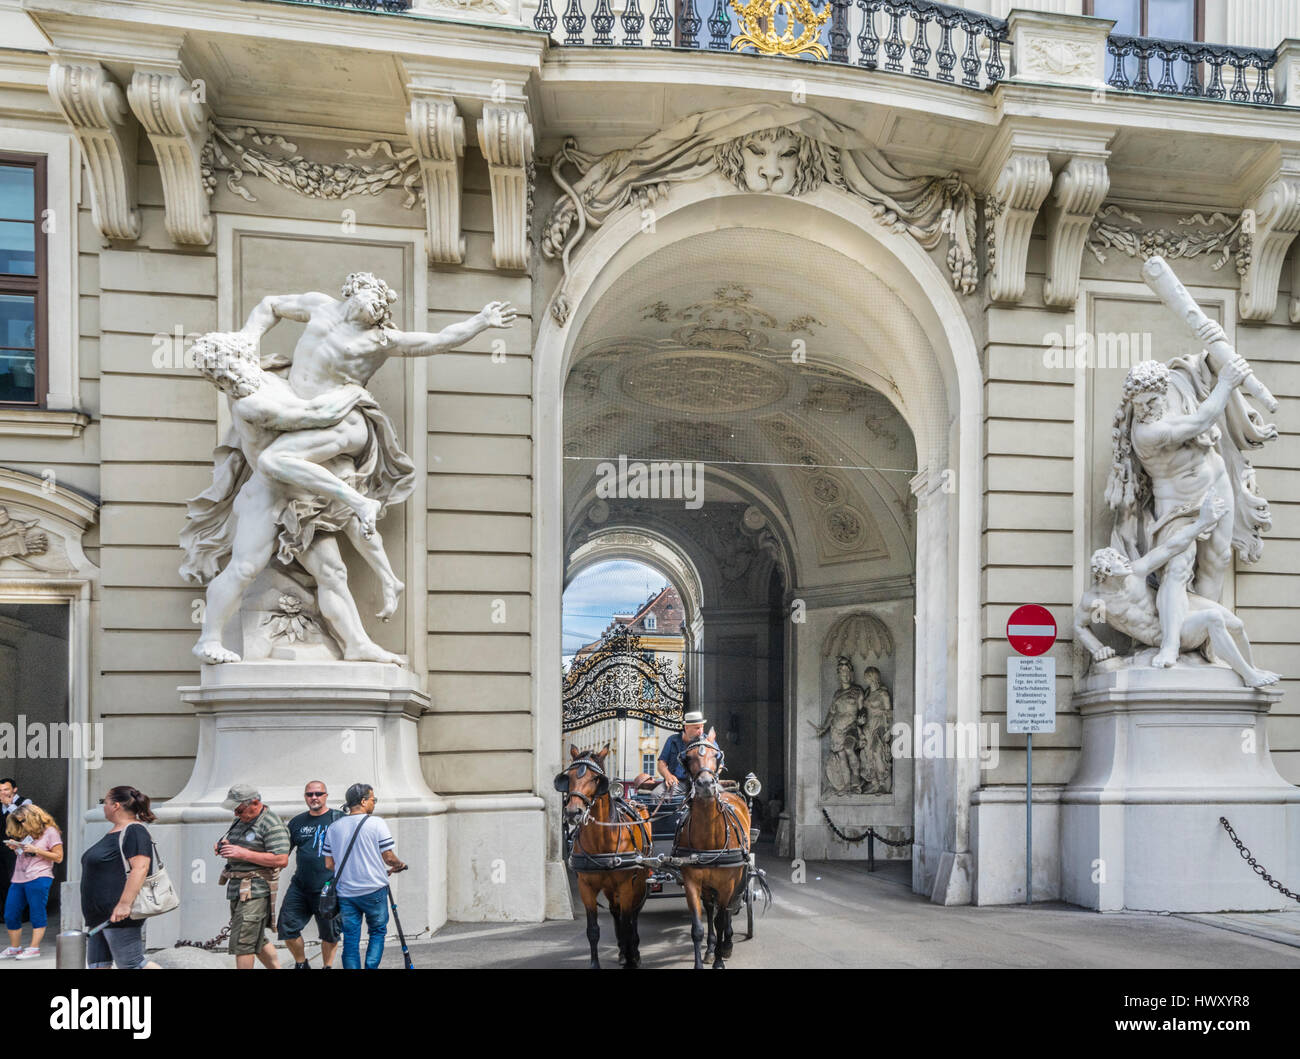 Austria, Vienna, Hofburg imperial palace, St. Michael's Gate with Hercules statues Stock Photo